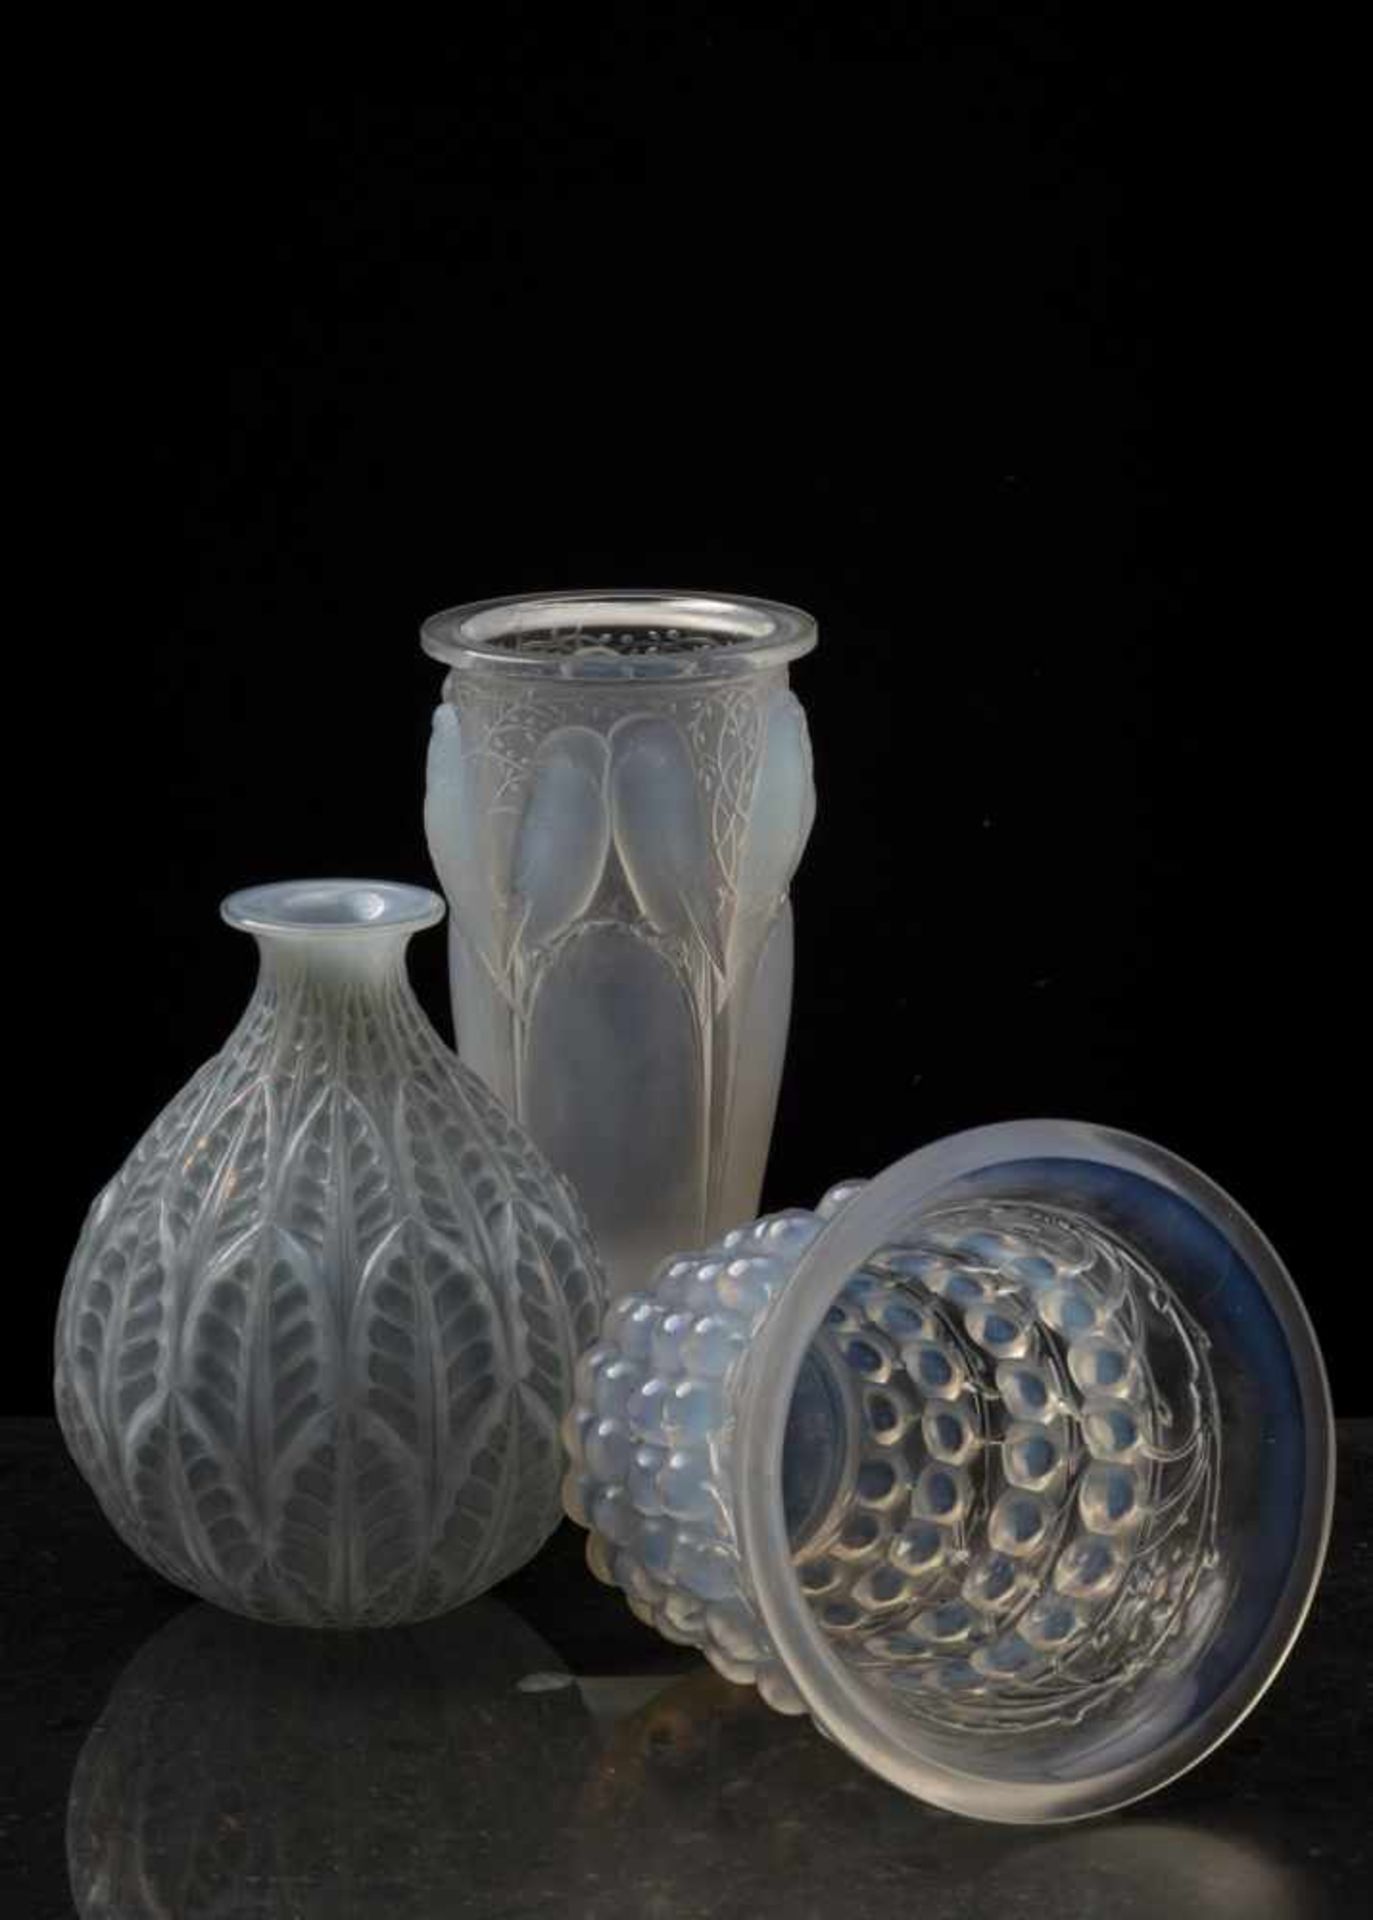 René Lalique, 'Ceylan' vase, 1924'Ceylan' vase, 1924H. 24.3 cm. Clear, moulded glass, satined and - Image 7 of 10